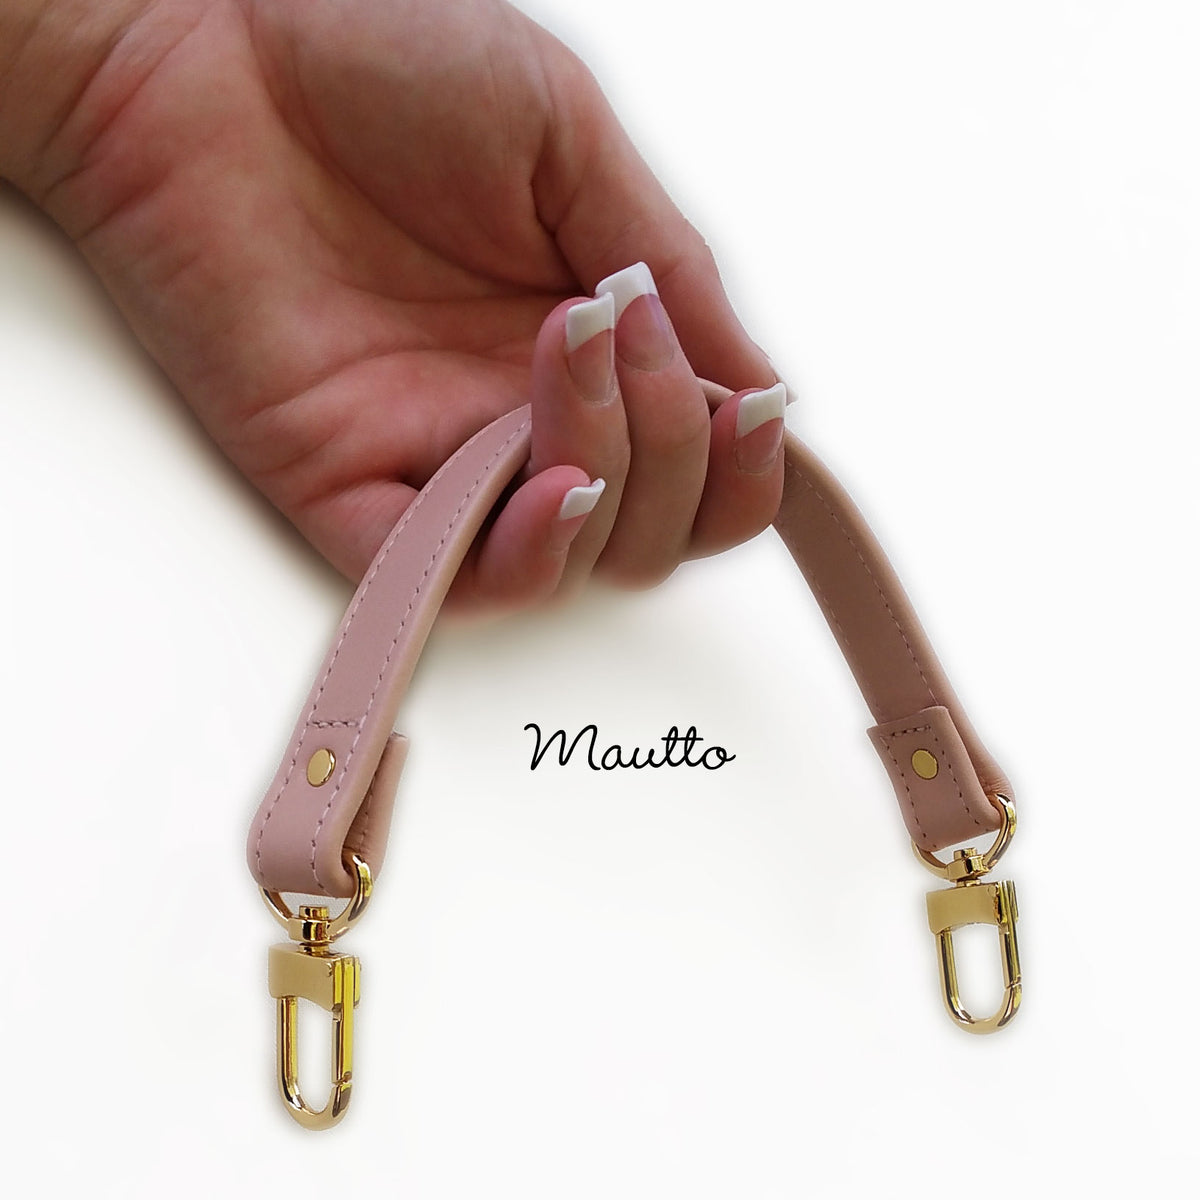 Leather Top Handle for LV Noe, Neo, Odeon & More - Accessory Strap